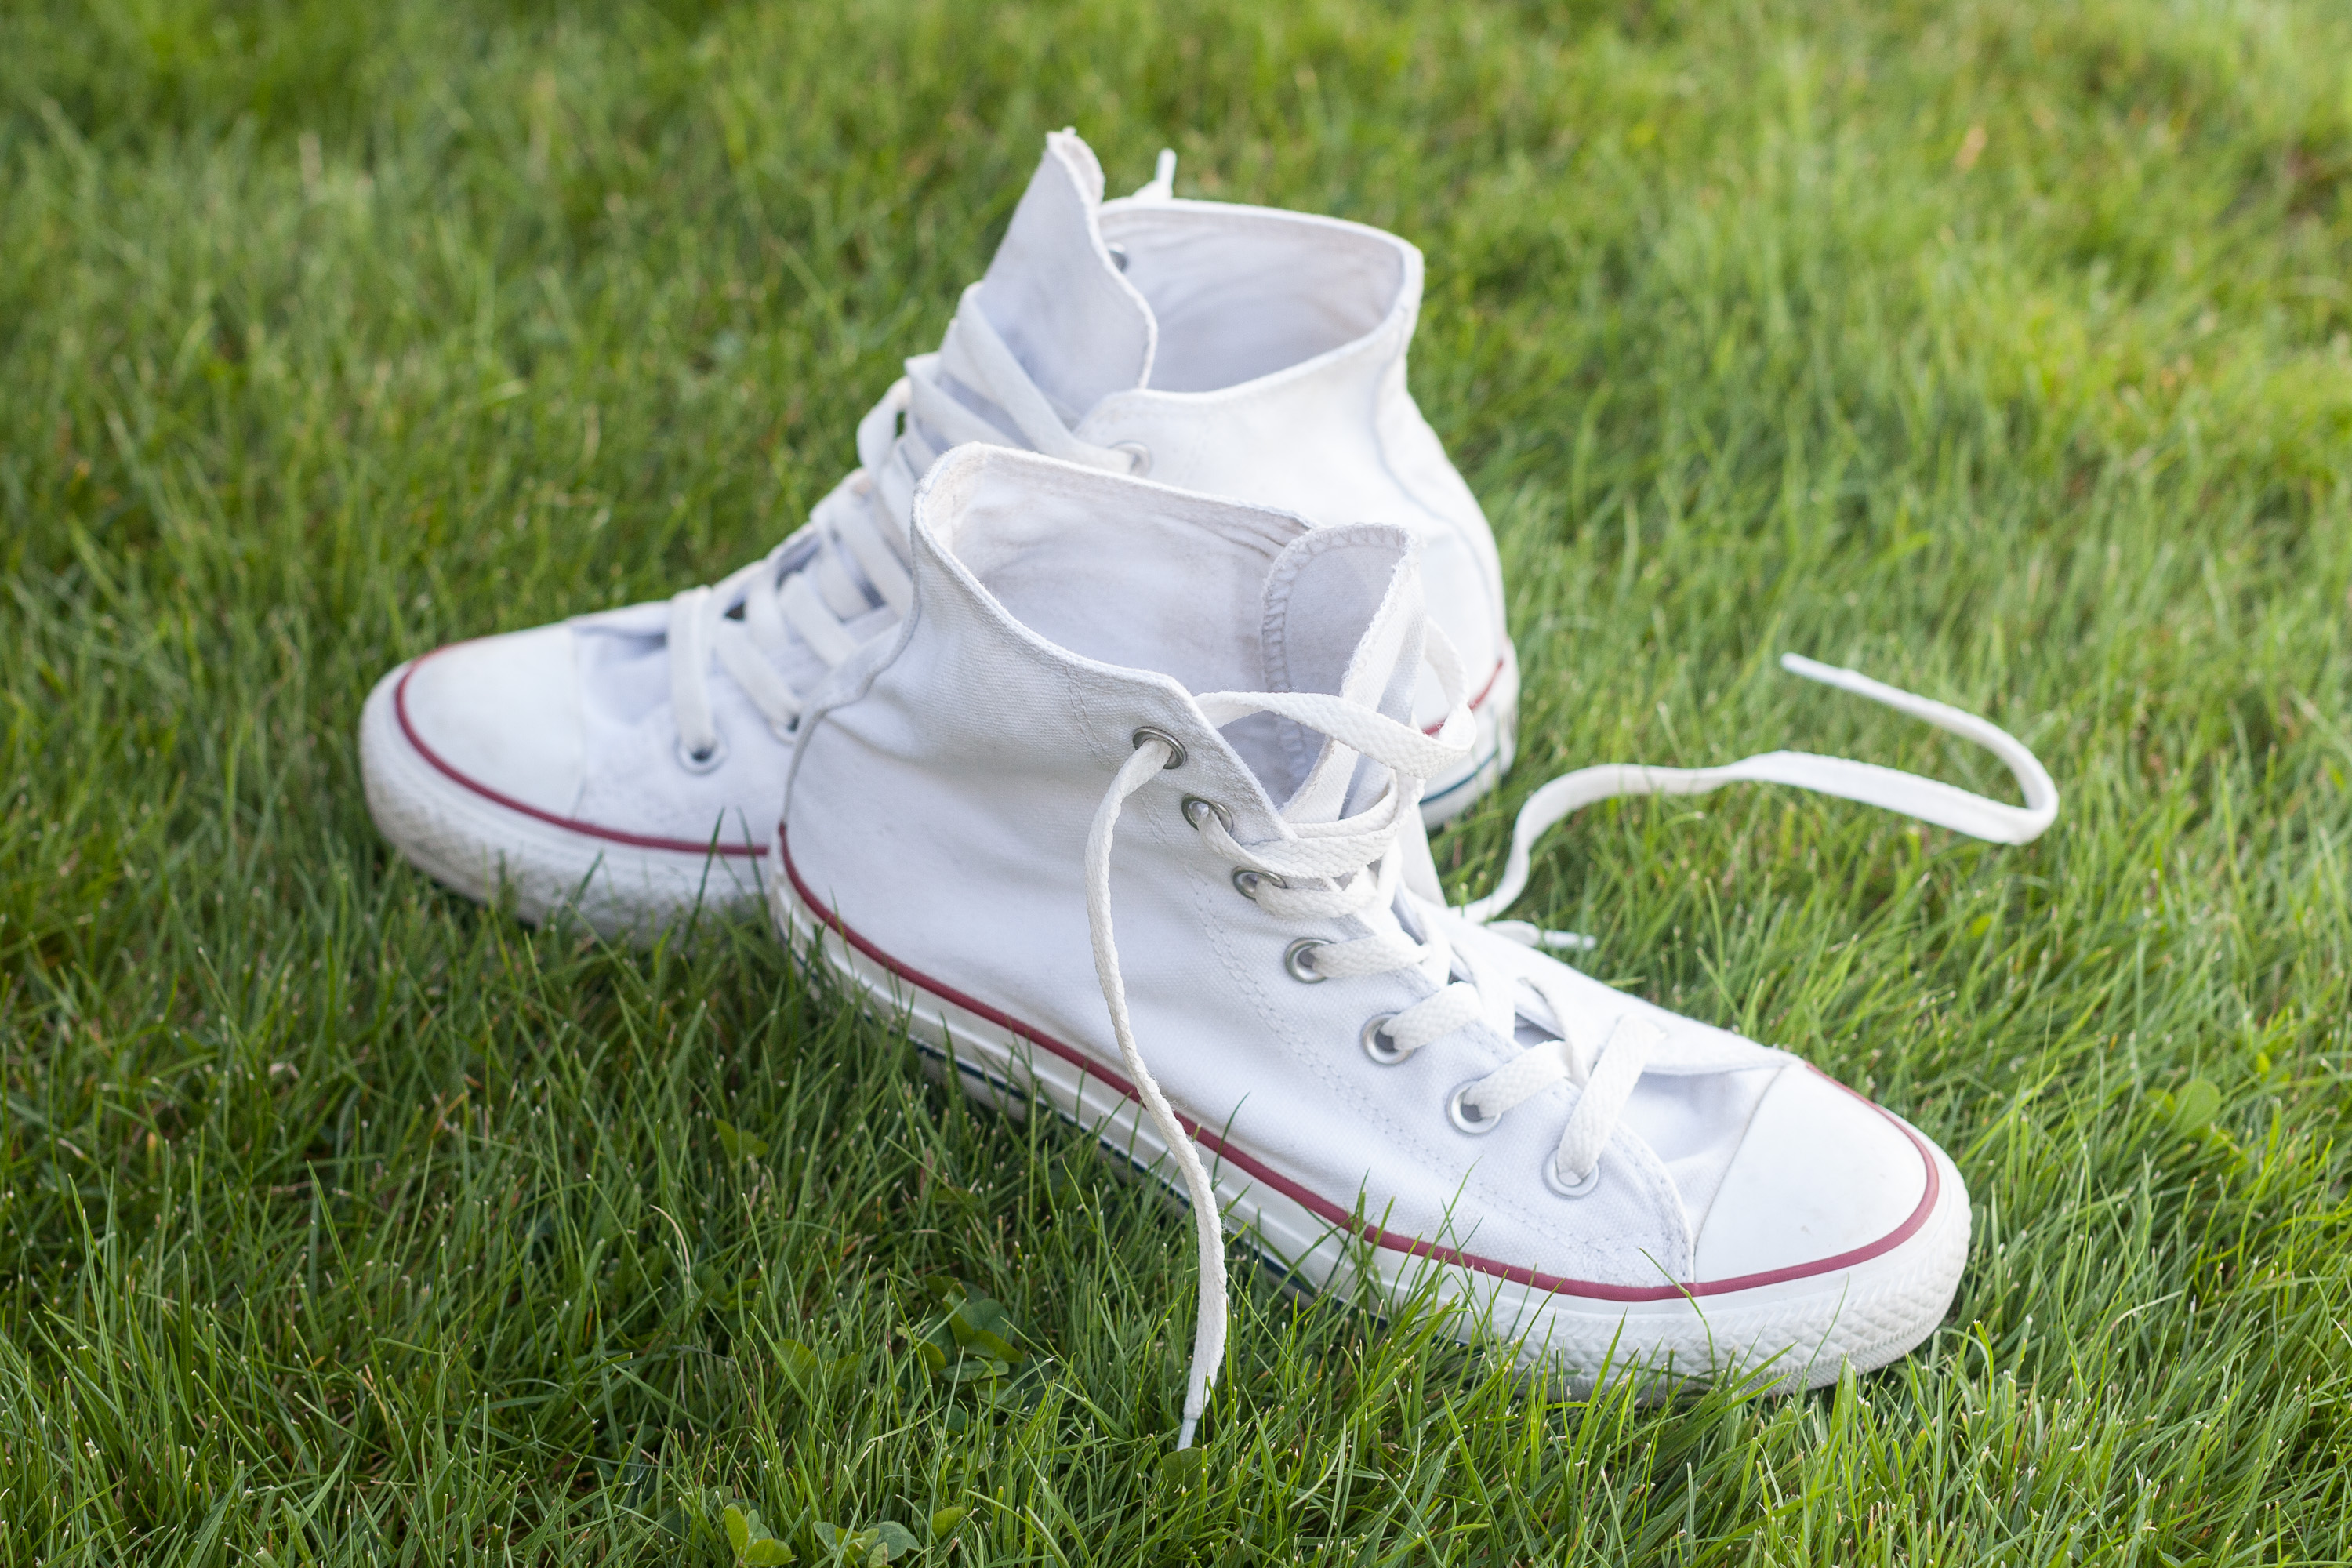 How to Waterproof Converse ehow